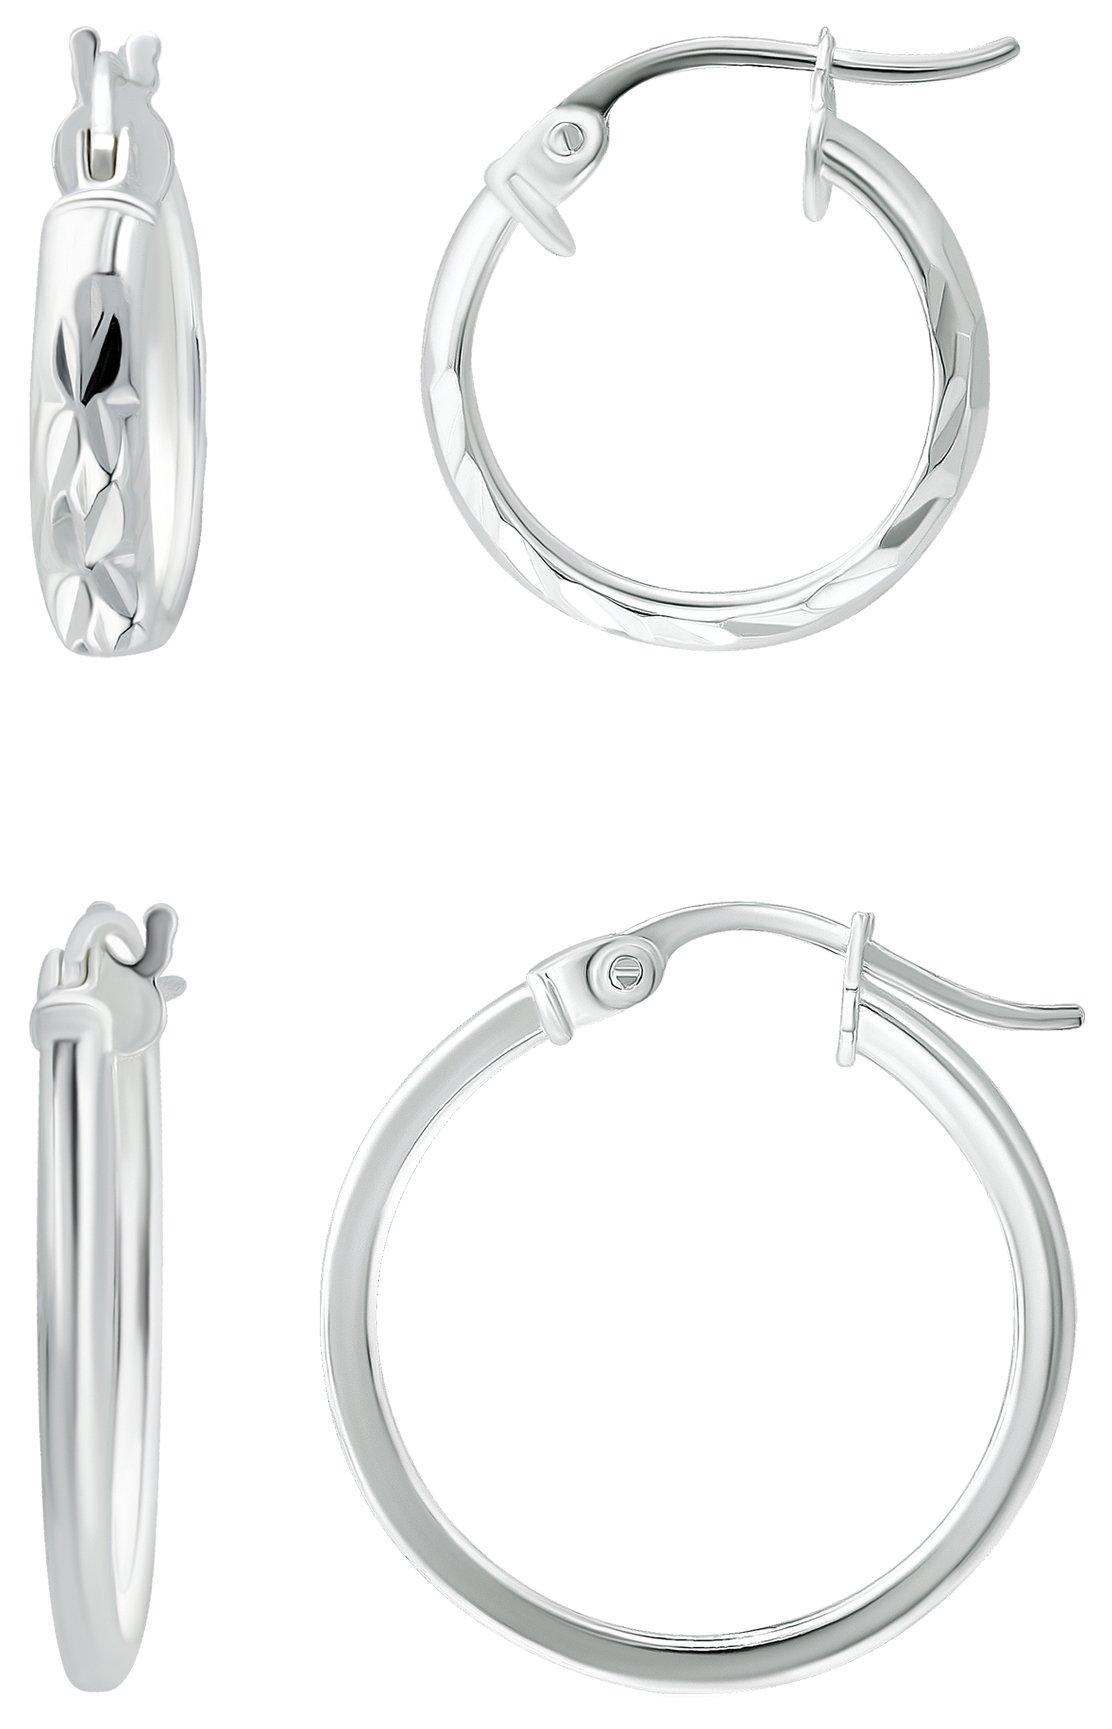 Piper & Taylor 2-Pc. Silver Tone Hoops Earring